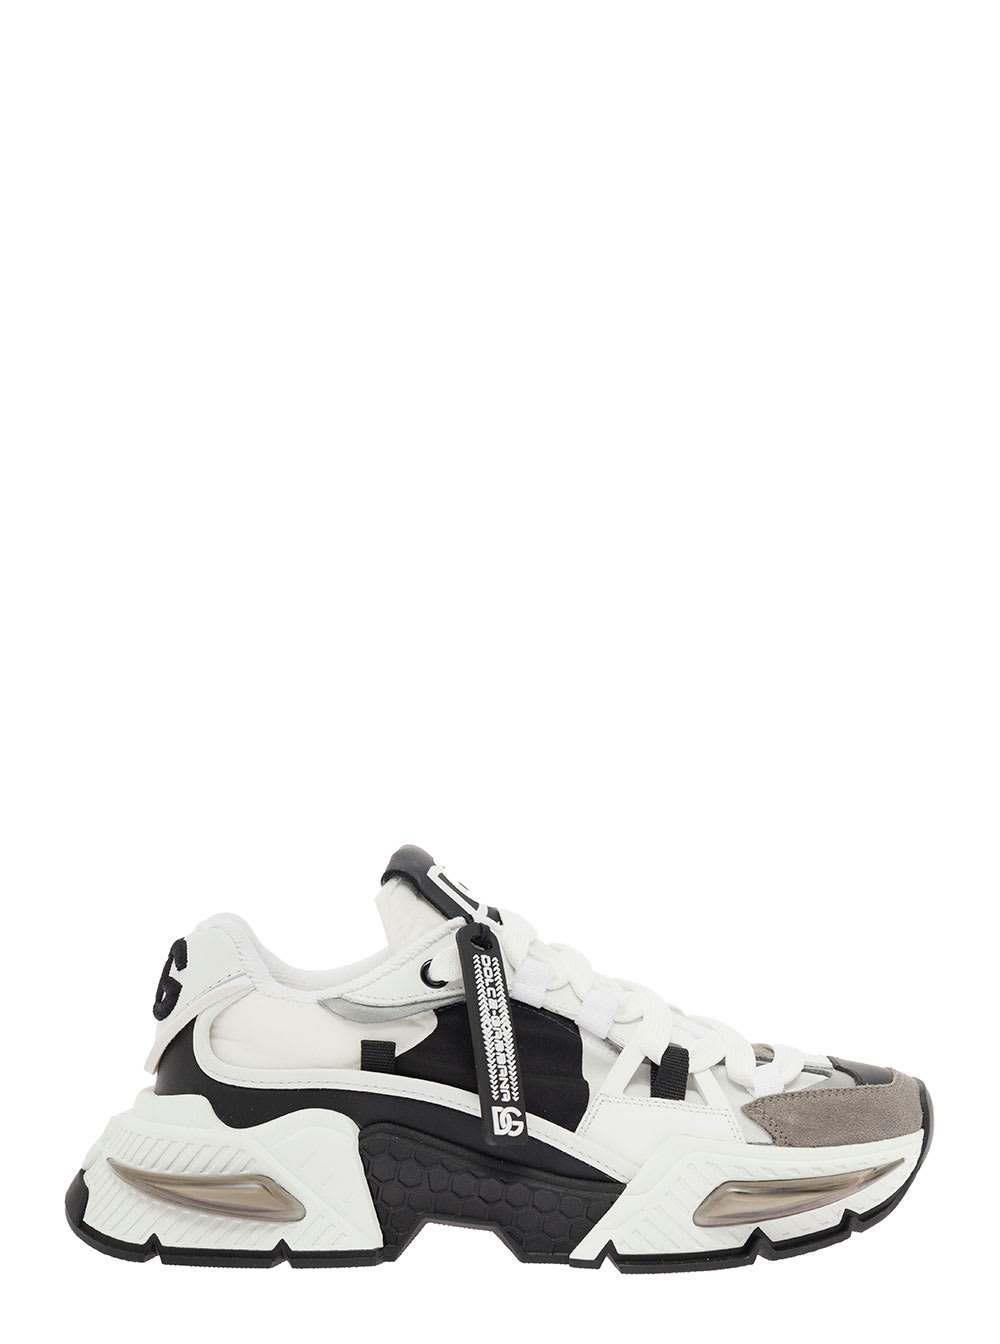 DOLCE & GABBANA DOLCE & GABBANA WOMANS MIX OF MATERIALS AIRMASTER SNEAKERS